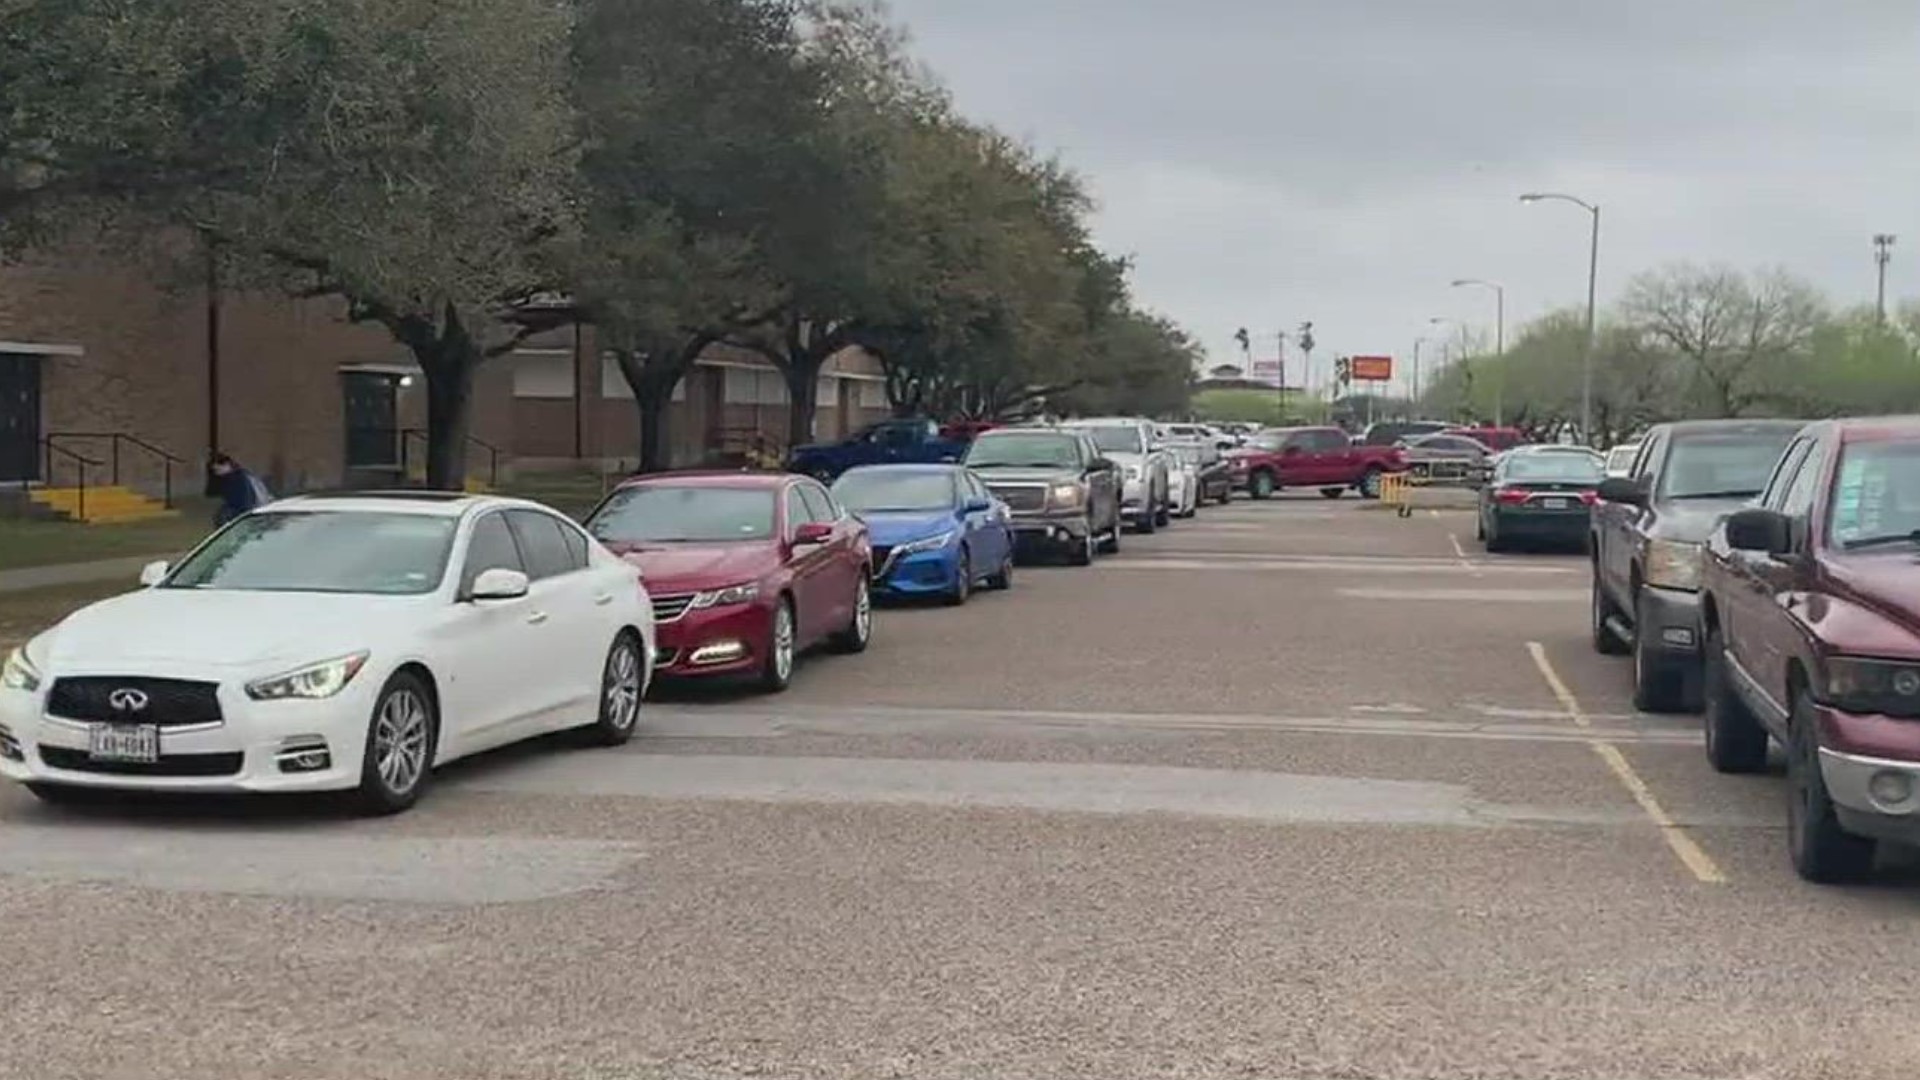 A district plan to help drivers navigate the heavy traffic around the high school during peak hours still has some calling for more action.